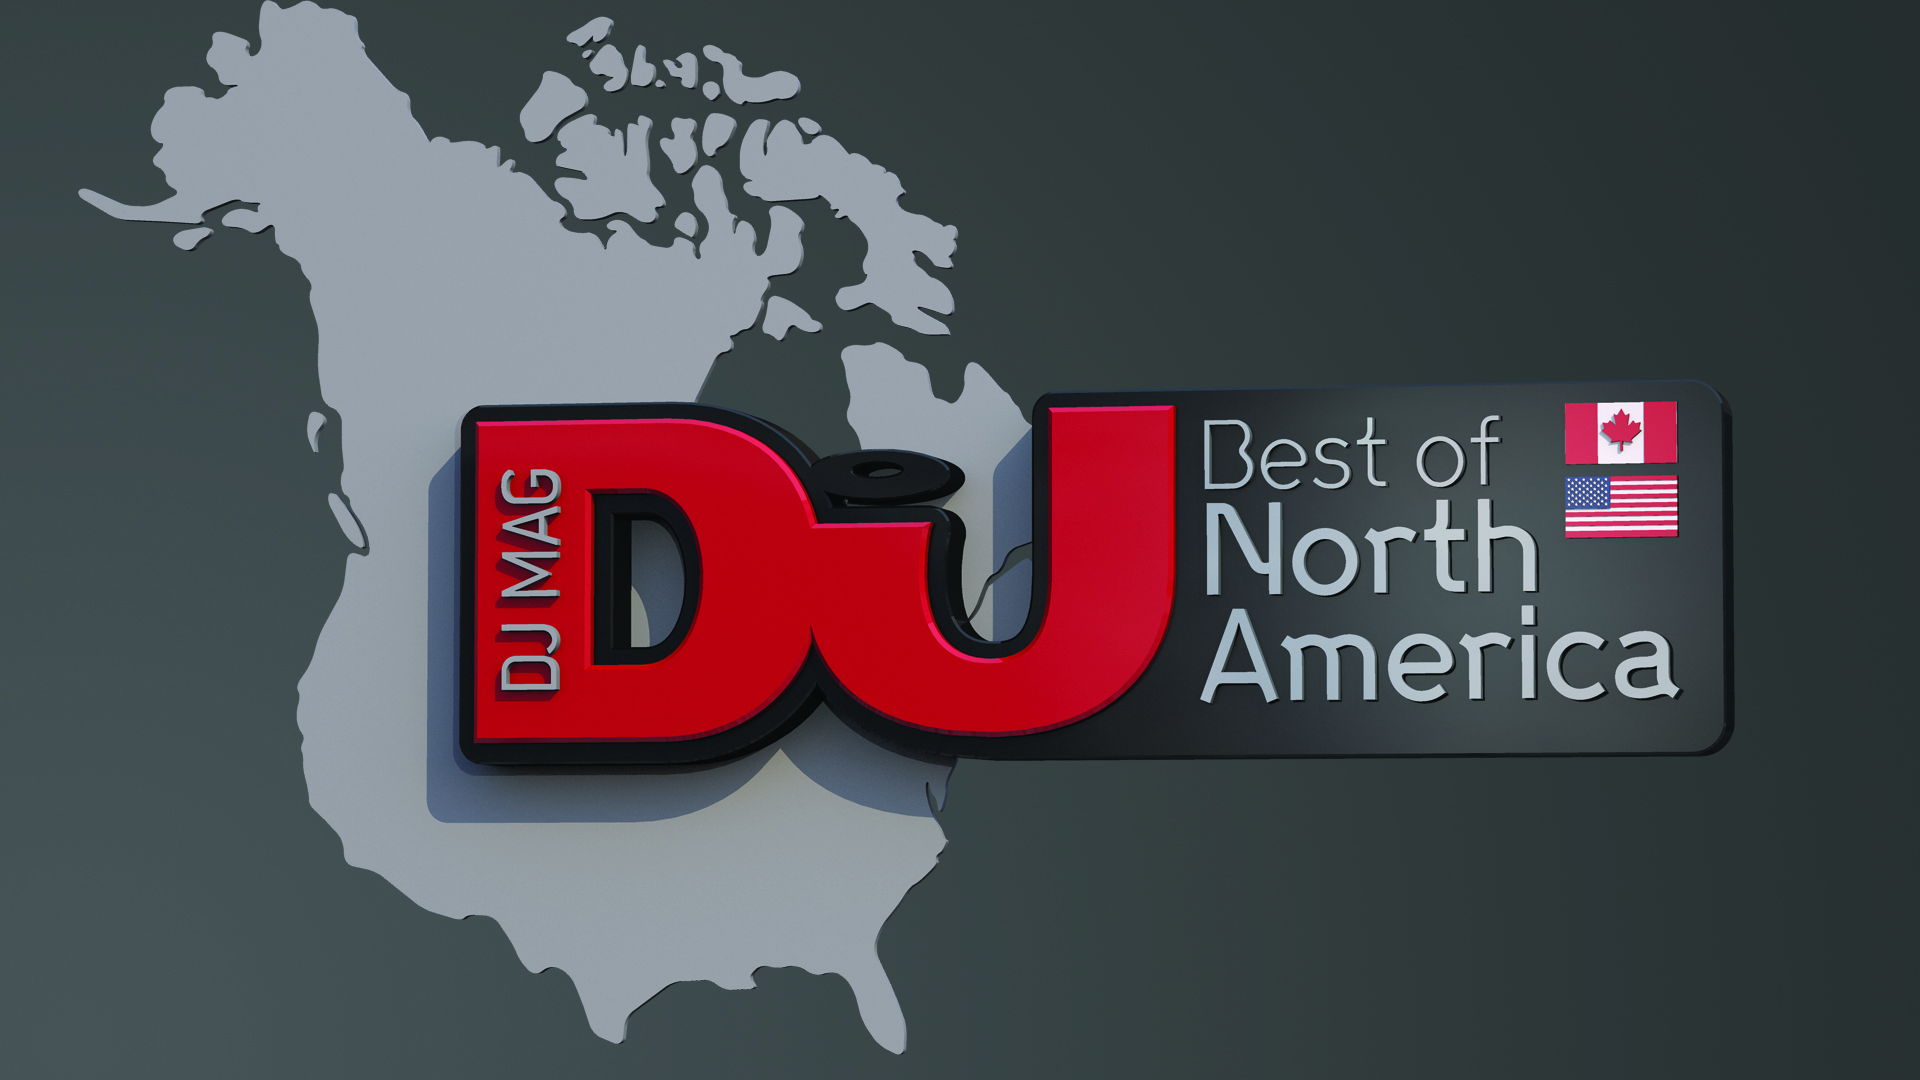 Best Of North America Awards 17 The Results Djmag Com